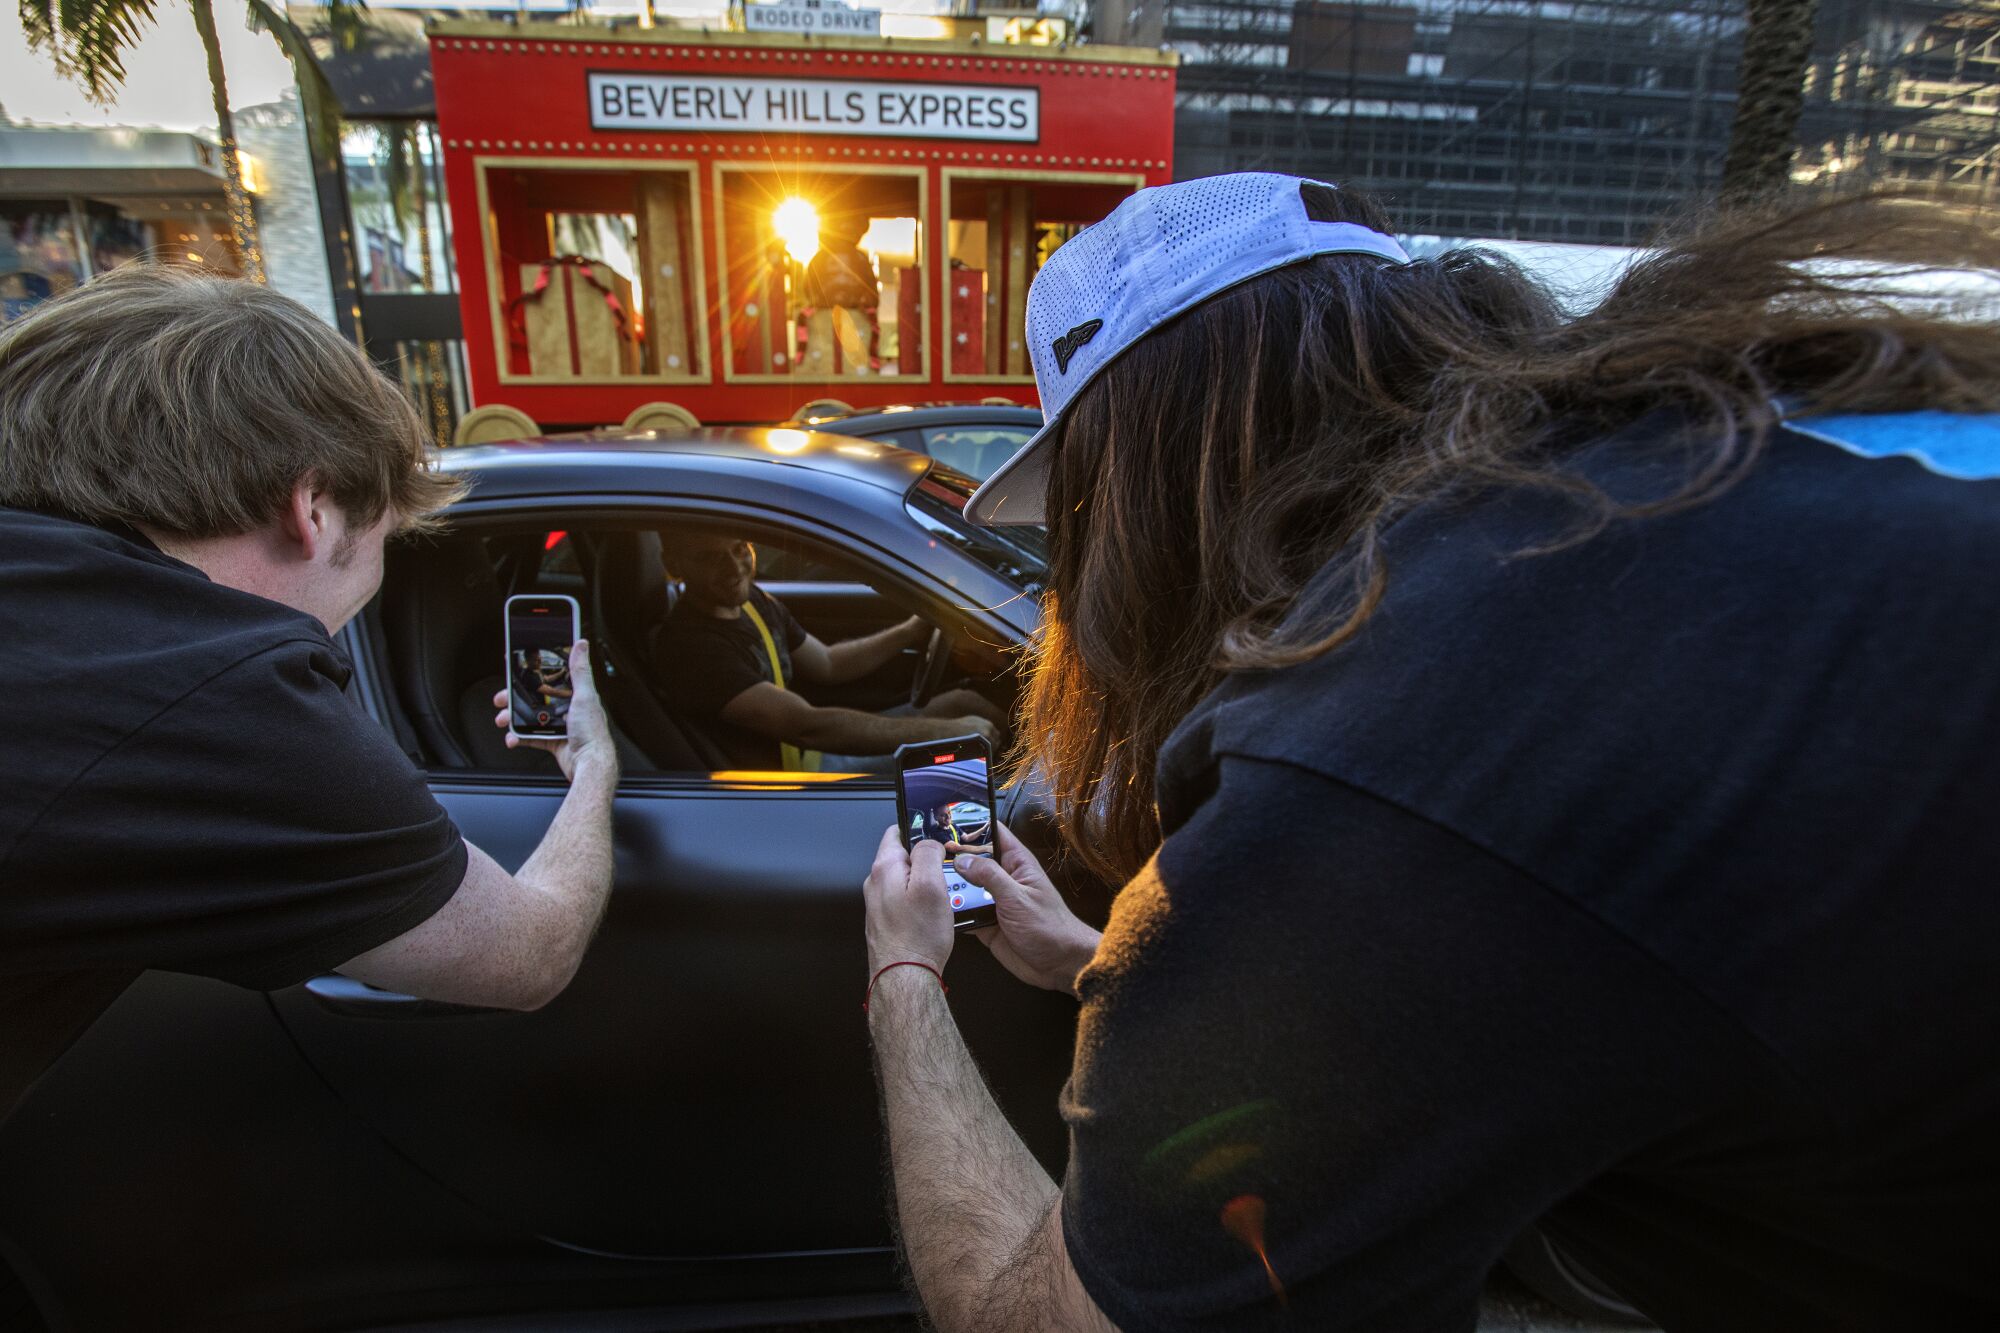 Daniel Macdonald and Blake Thompson use their iPhones to take video of a driver